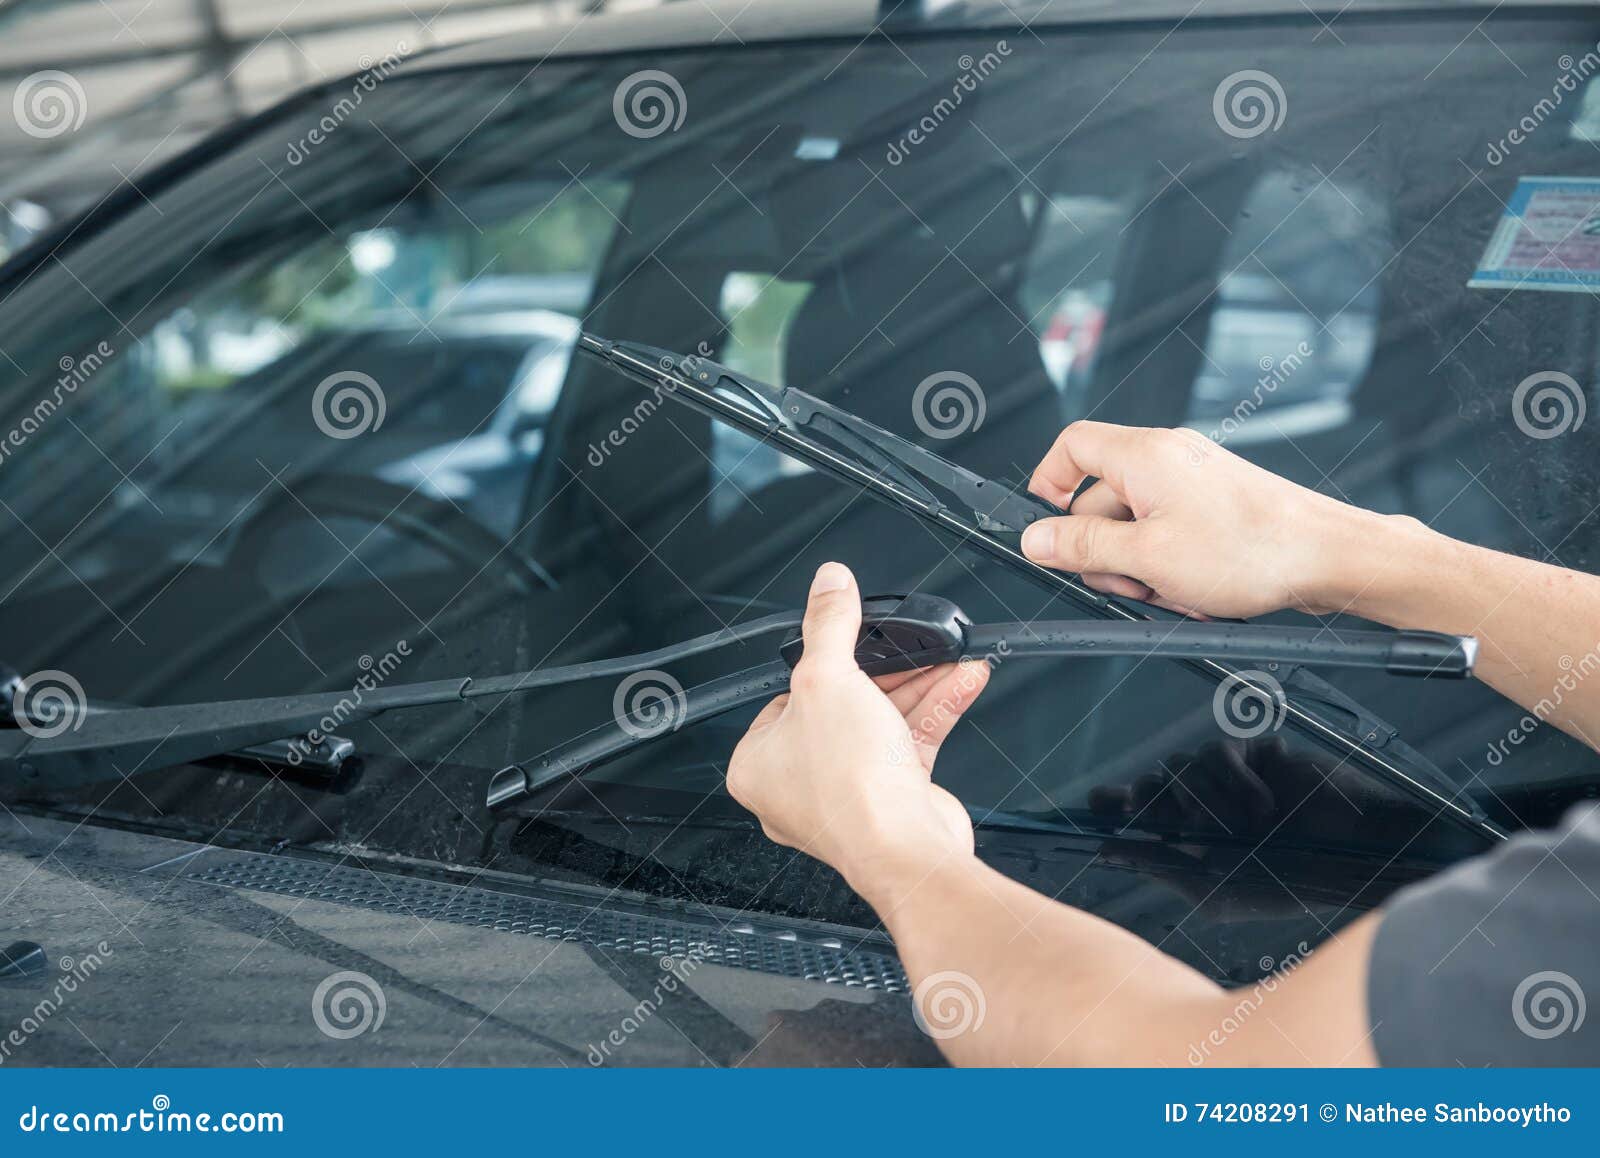 man is changing windscreen wipers on a car